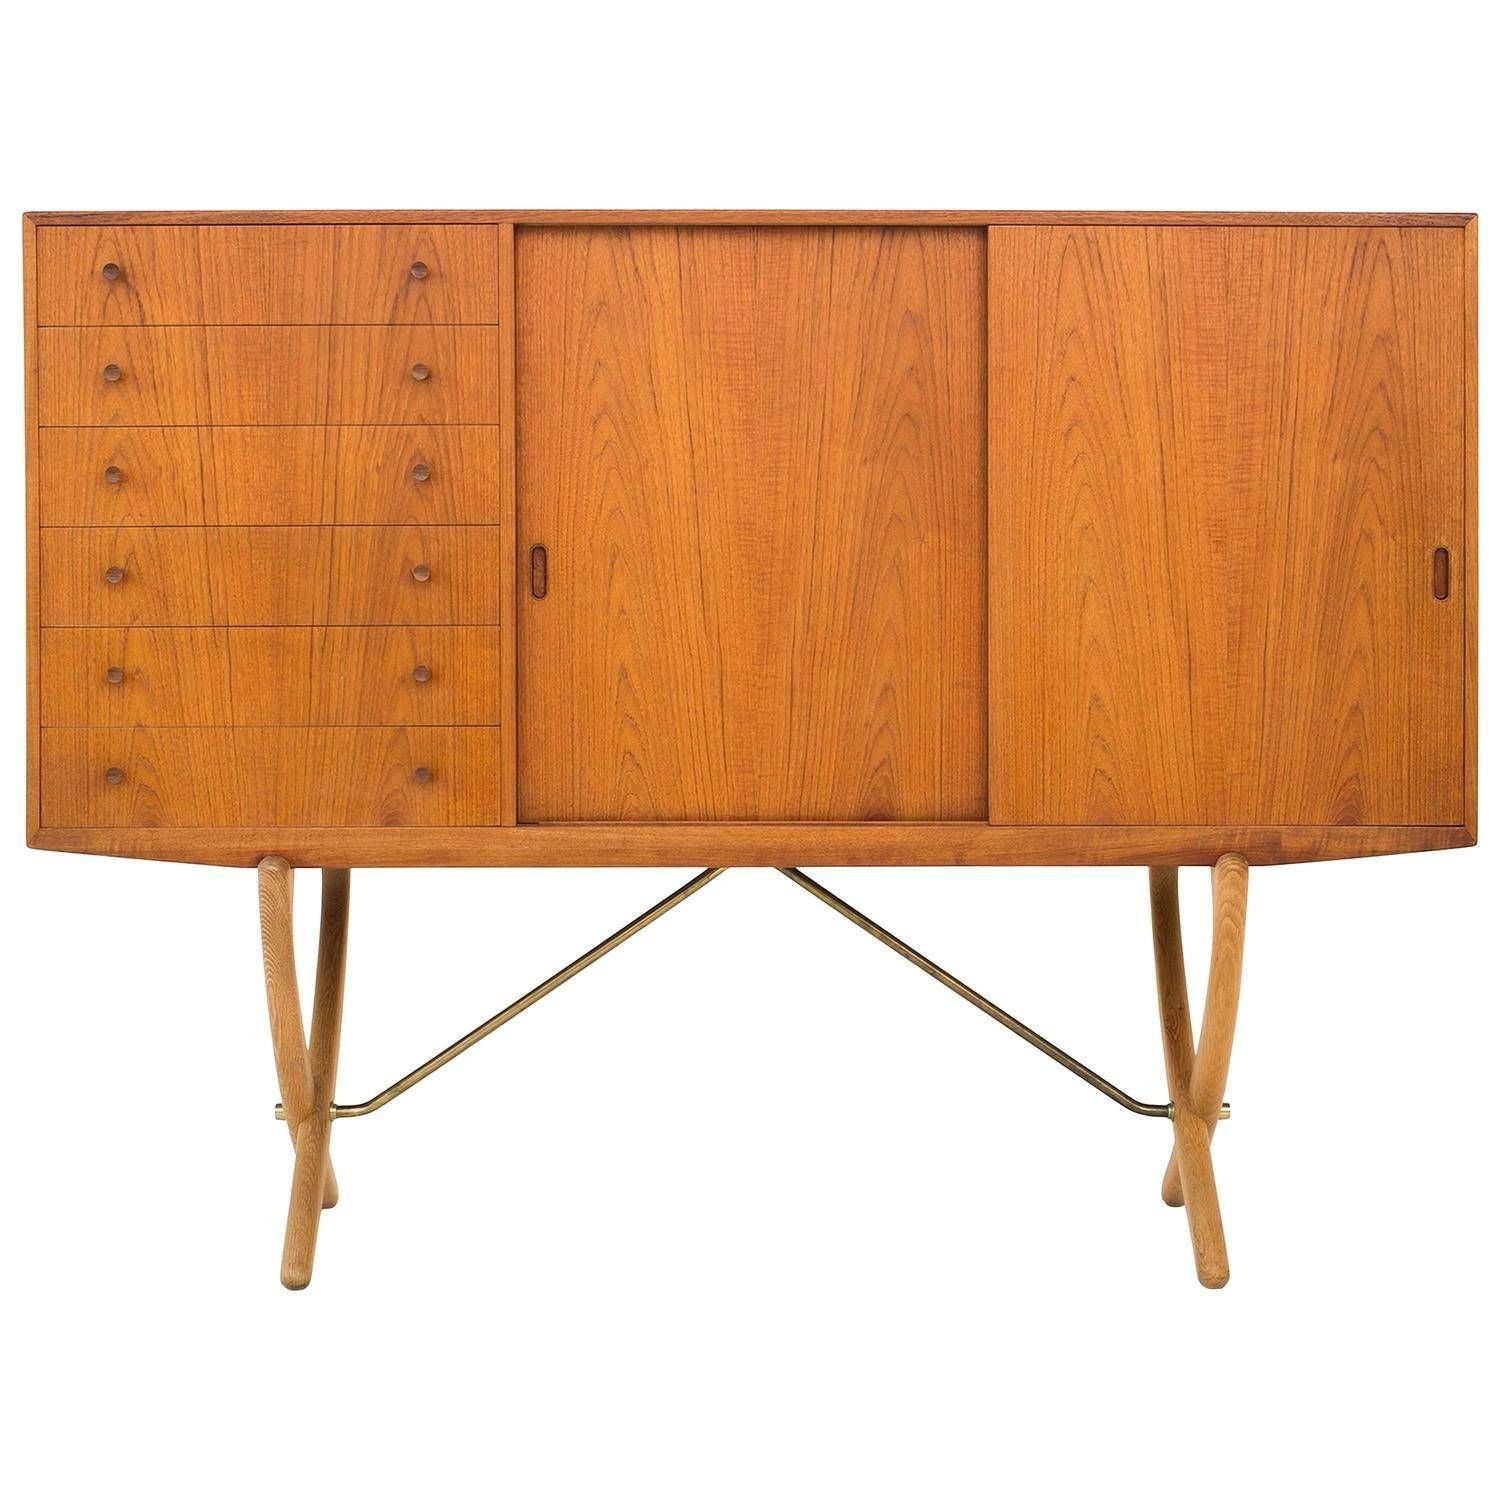 Ch 304 Hans J. Wegner Sideboard For Sale At 1stdibs Pertaining To Most Recently Released Hans Wegner Sideboards (Photo 3 of 15)